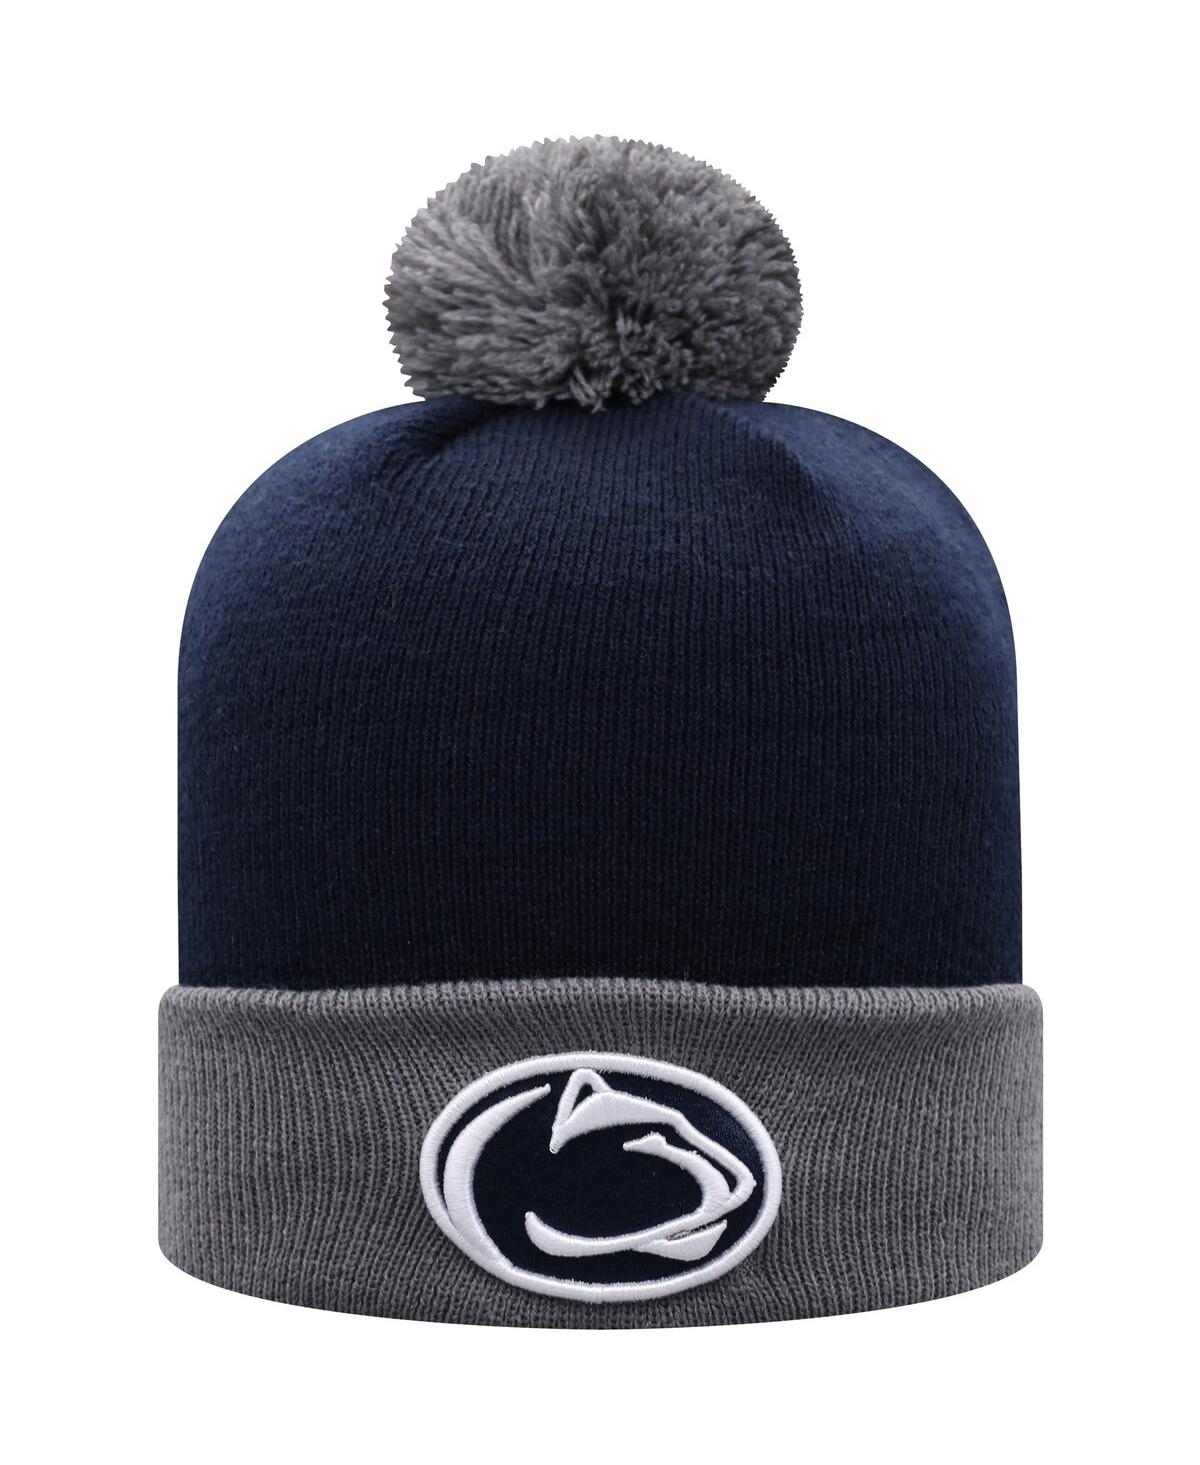 Top Of The World Men's Navy And Gray Penn State Nittany Lions Core 2-tone Cuffed Knit Hat With Pom In Navy,gray